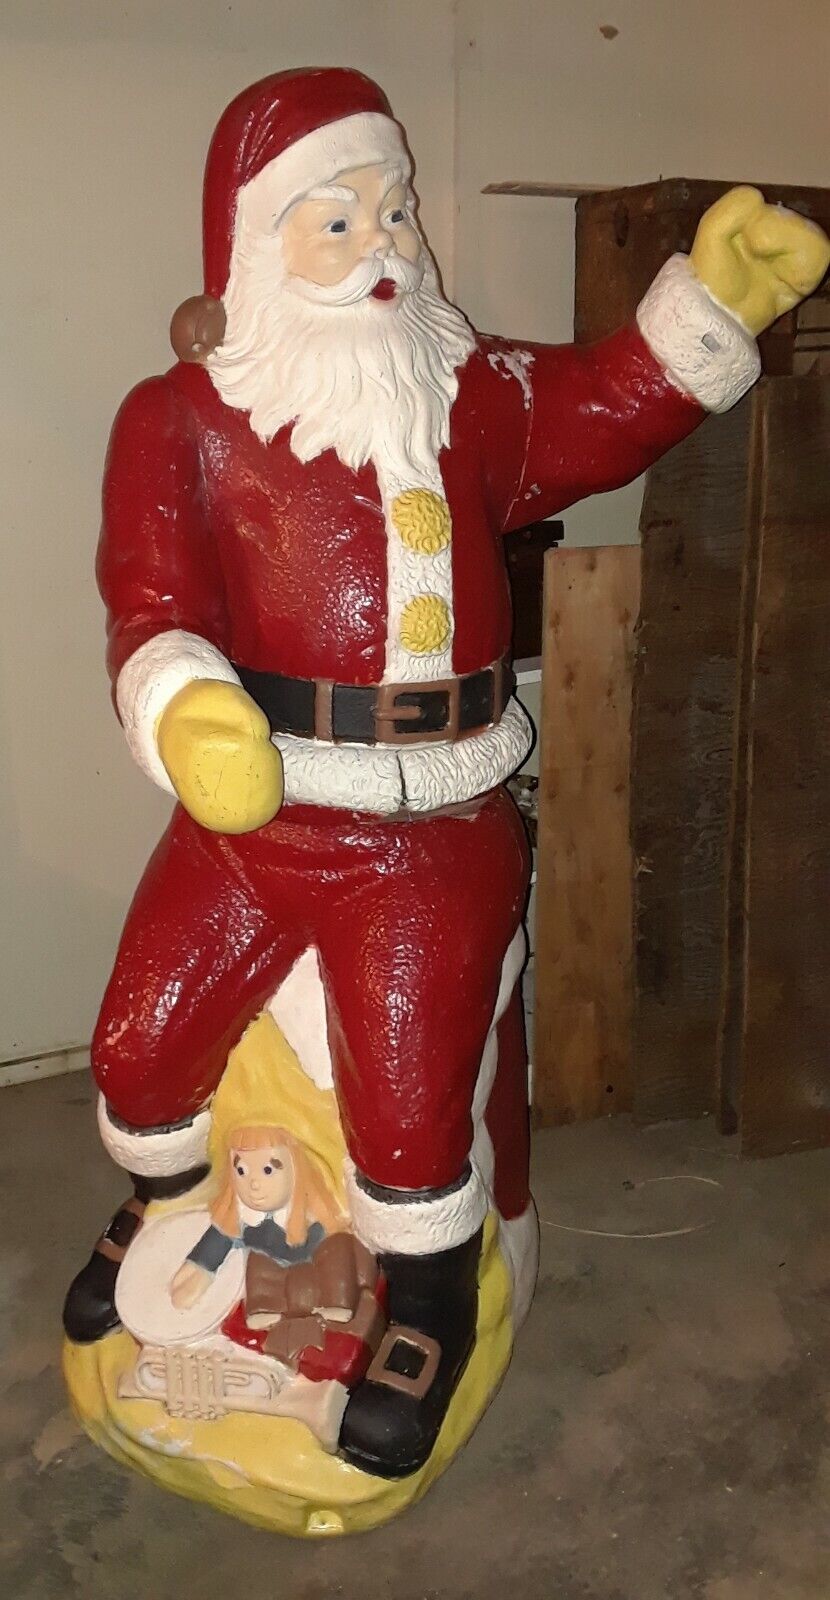 ☆RARE Adorable Large Vintage Poloron Santa Blow Mold WORKS Almost Life-Size 5ft